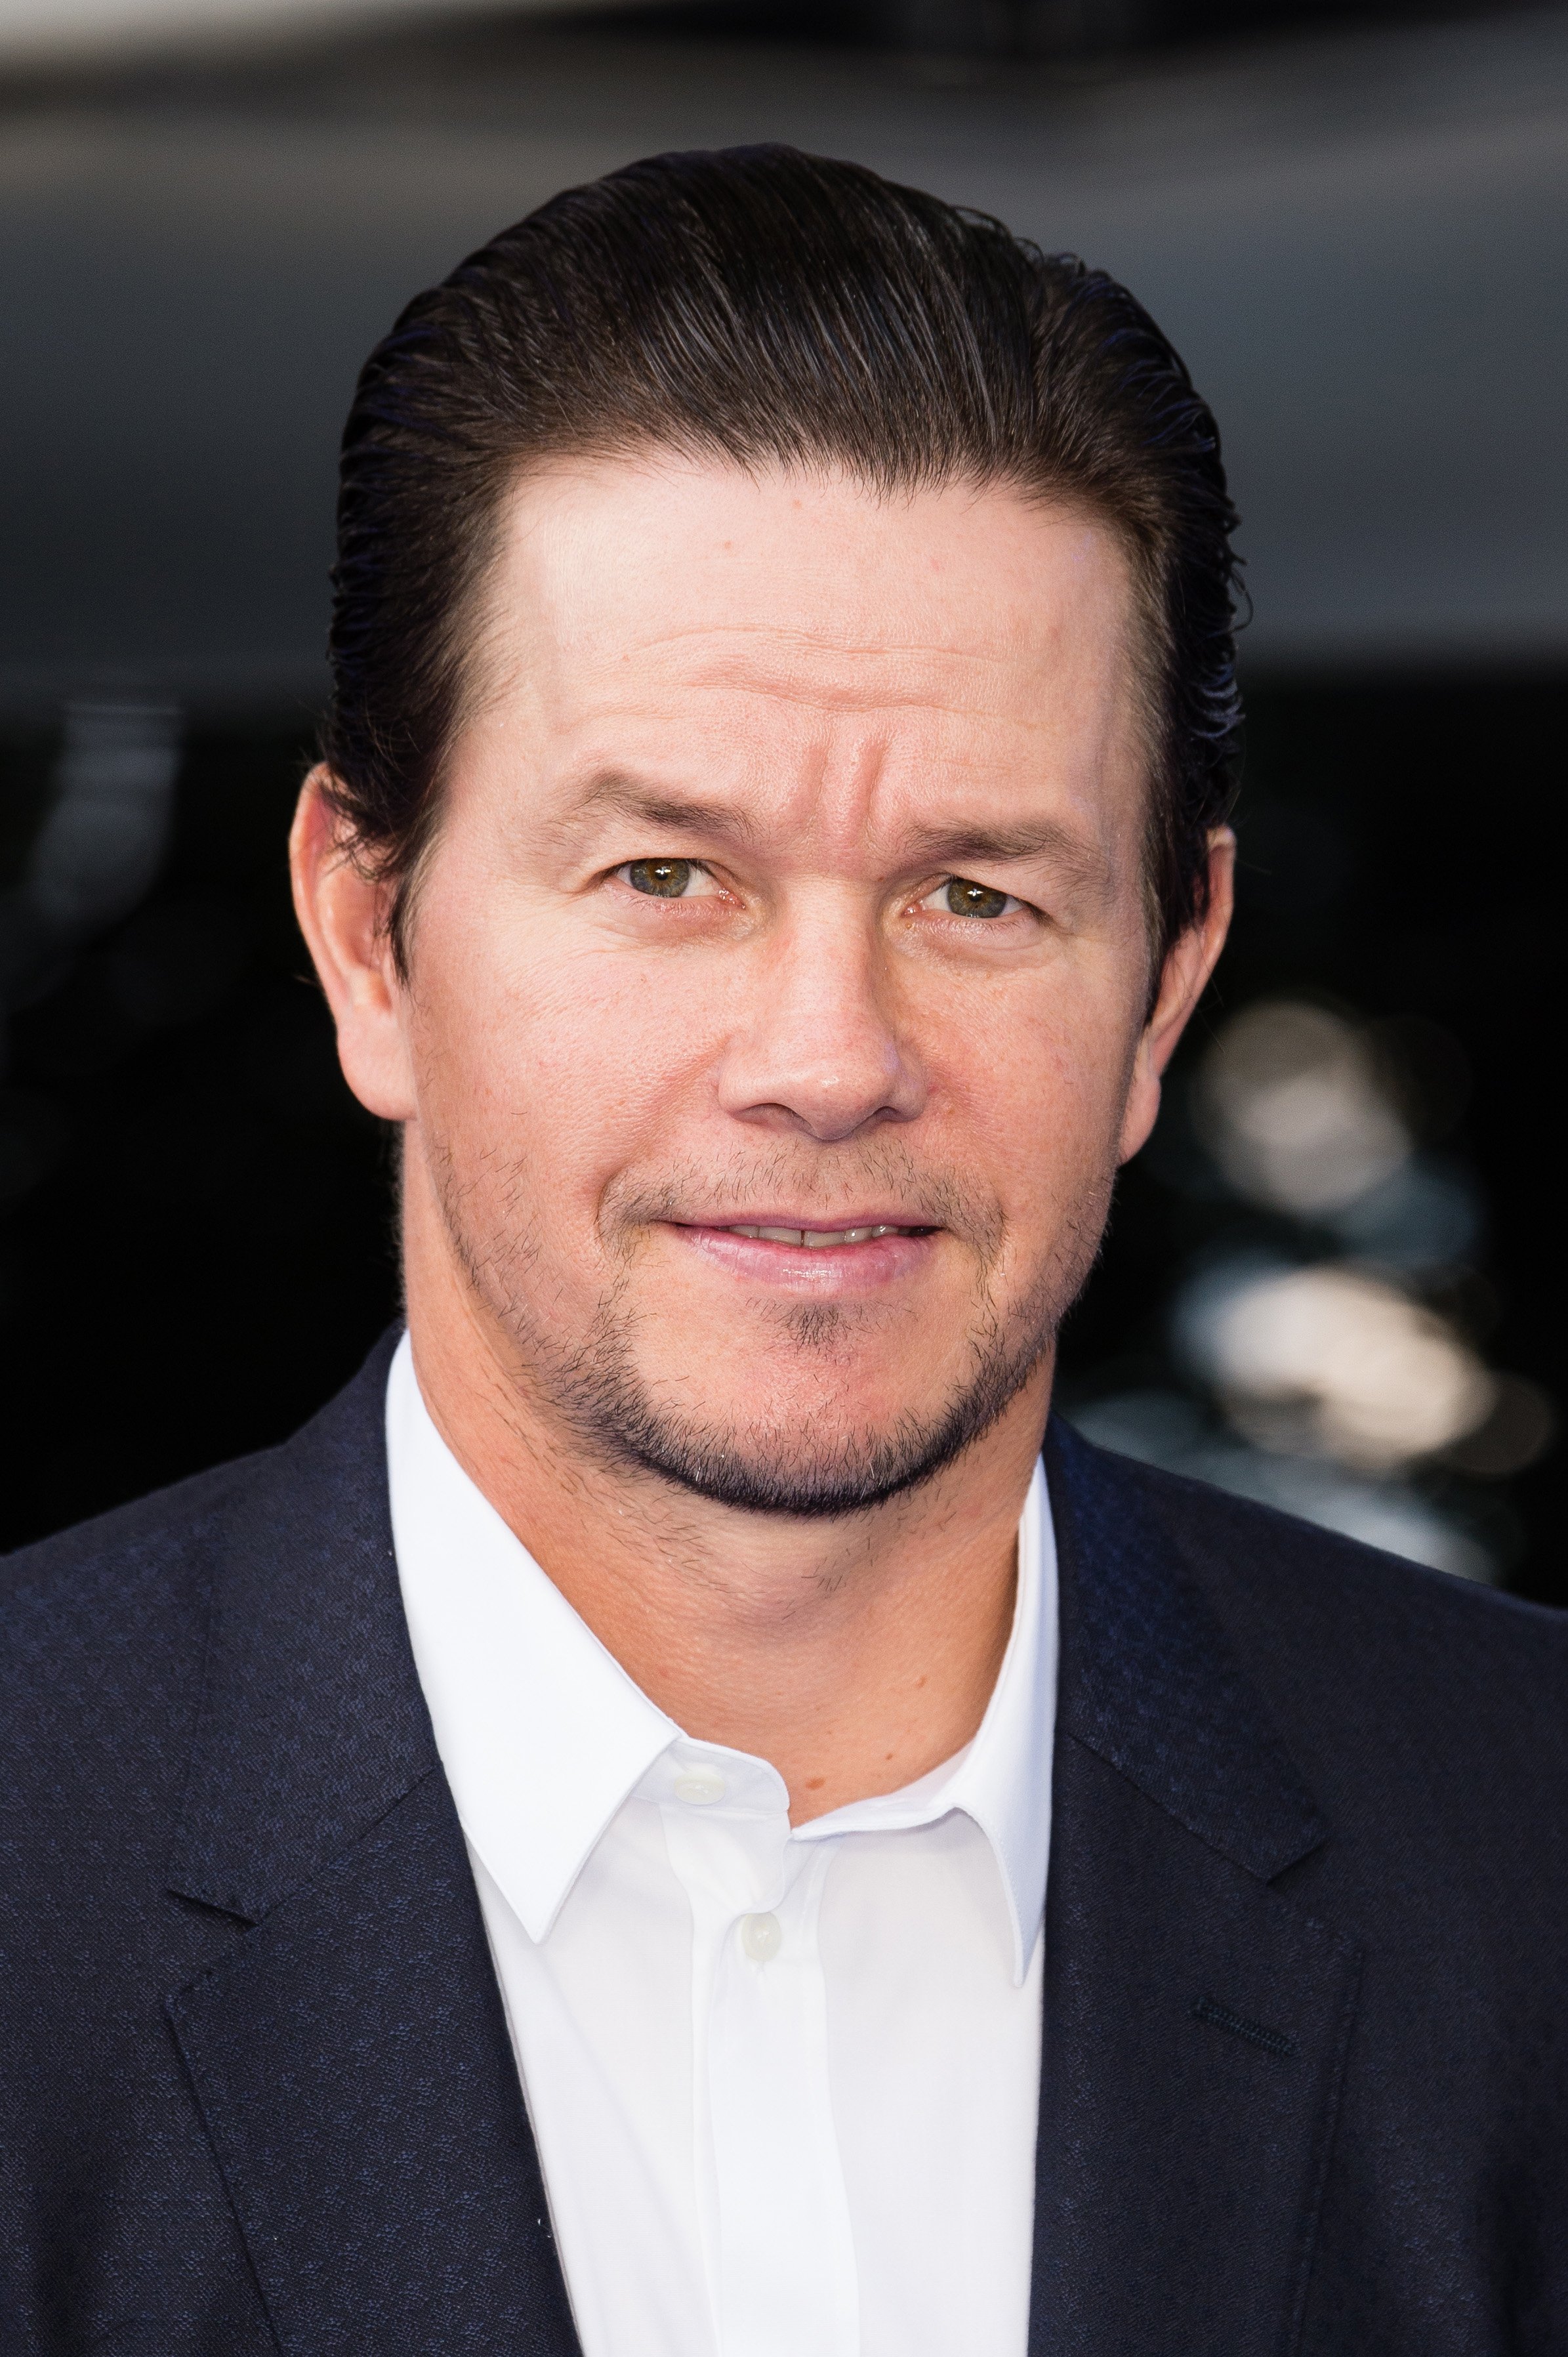 Mark Wahlberg attends the premiere of "Transformers: The Last Knight" in London, England on June 18, 2017 | Photo: Getty Images